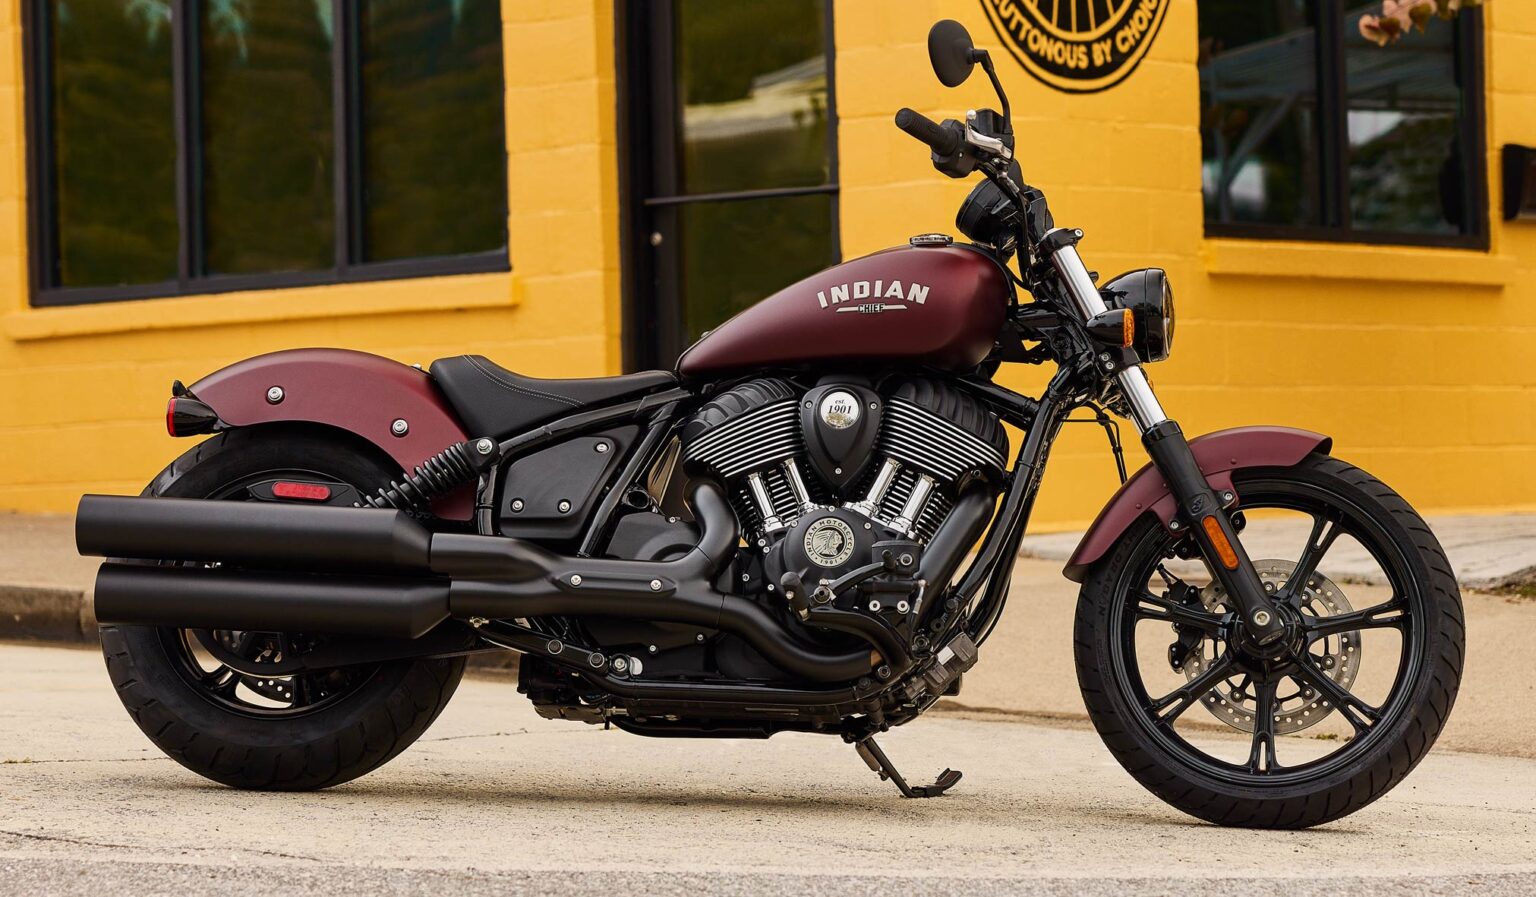 2023 Indian Chief4 1536x897 